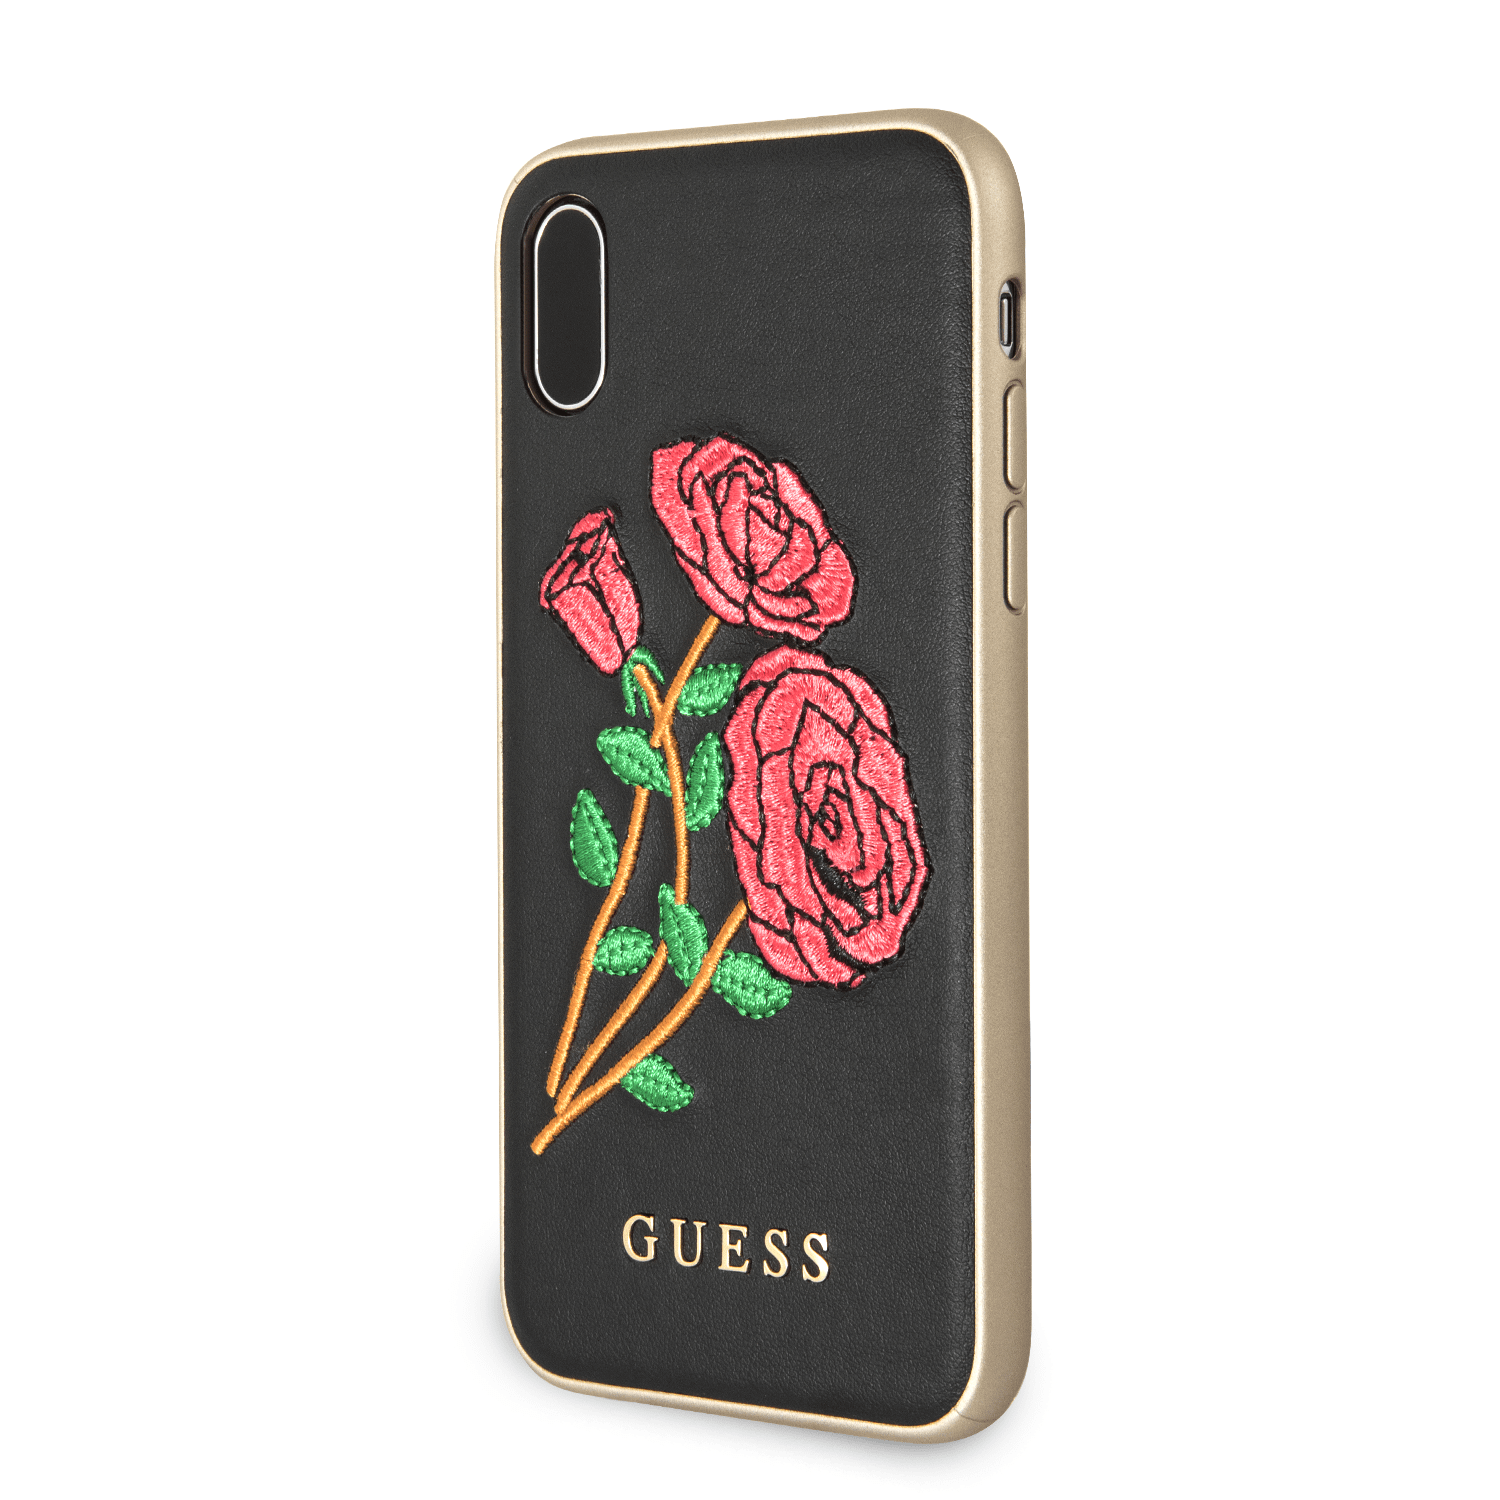 Discover the GUESS iPhone X Cell Phone Case, combining fashion-forward design with reliable protection for your device